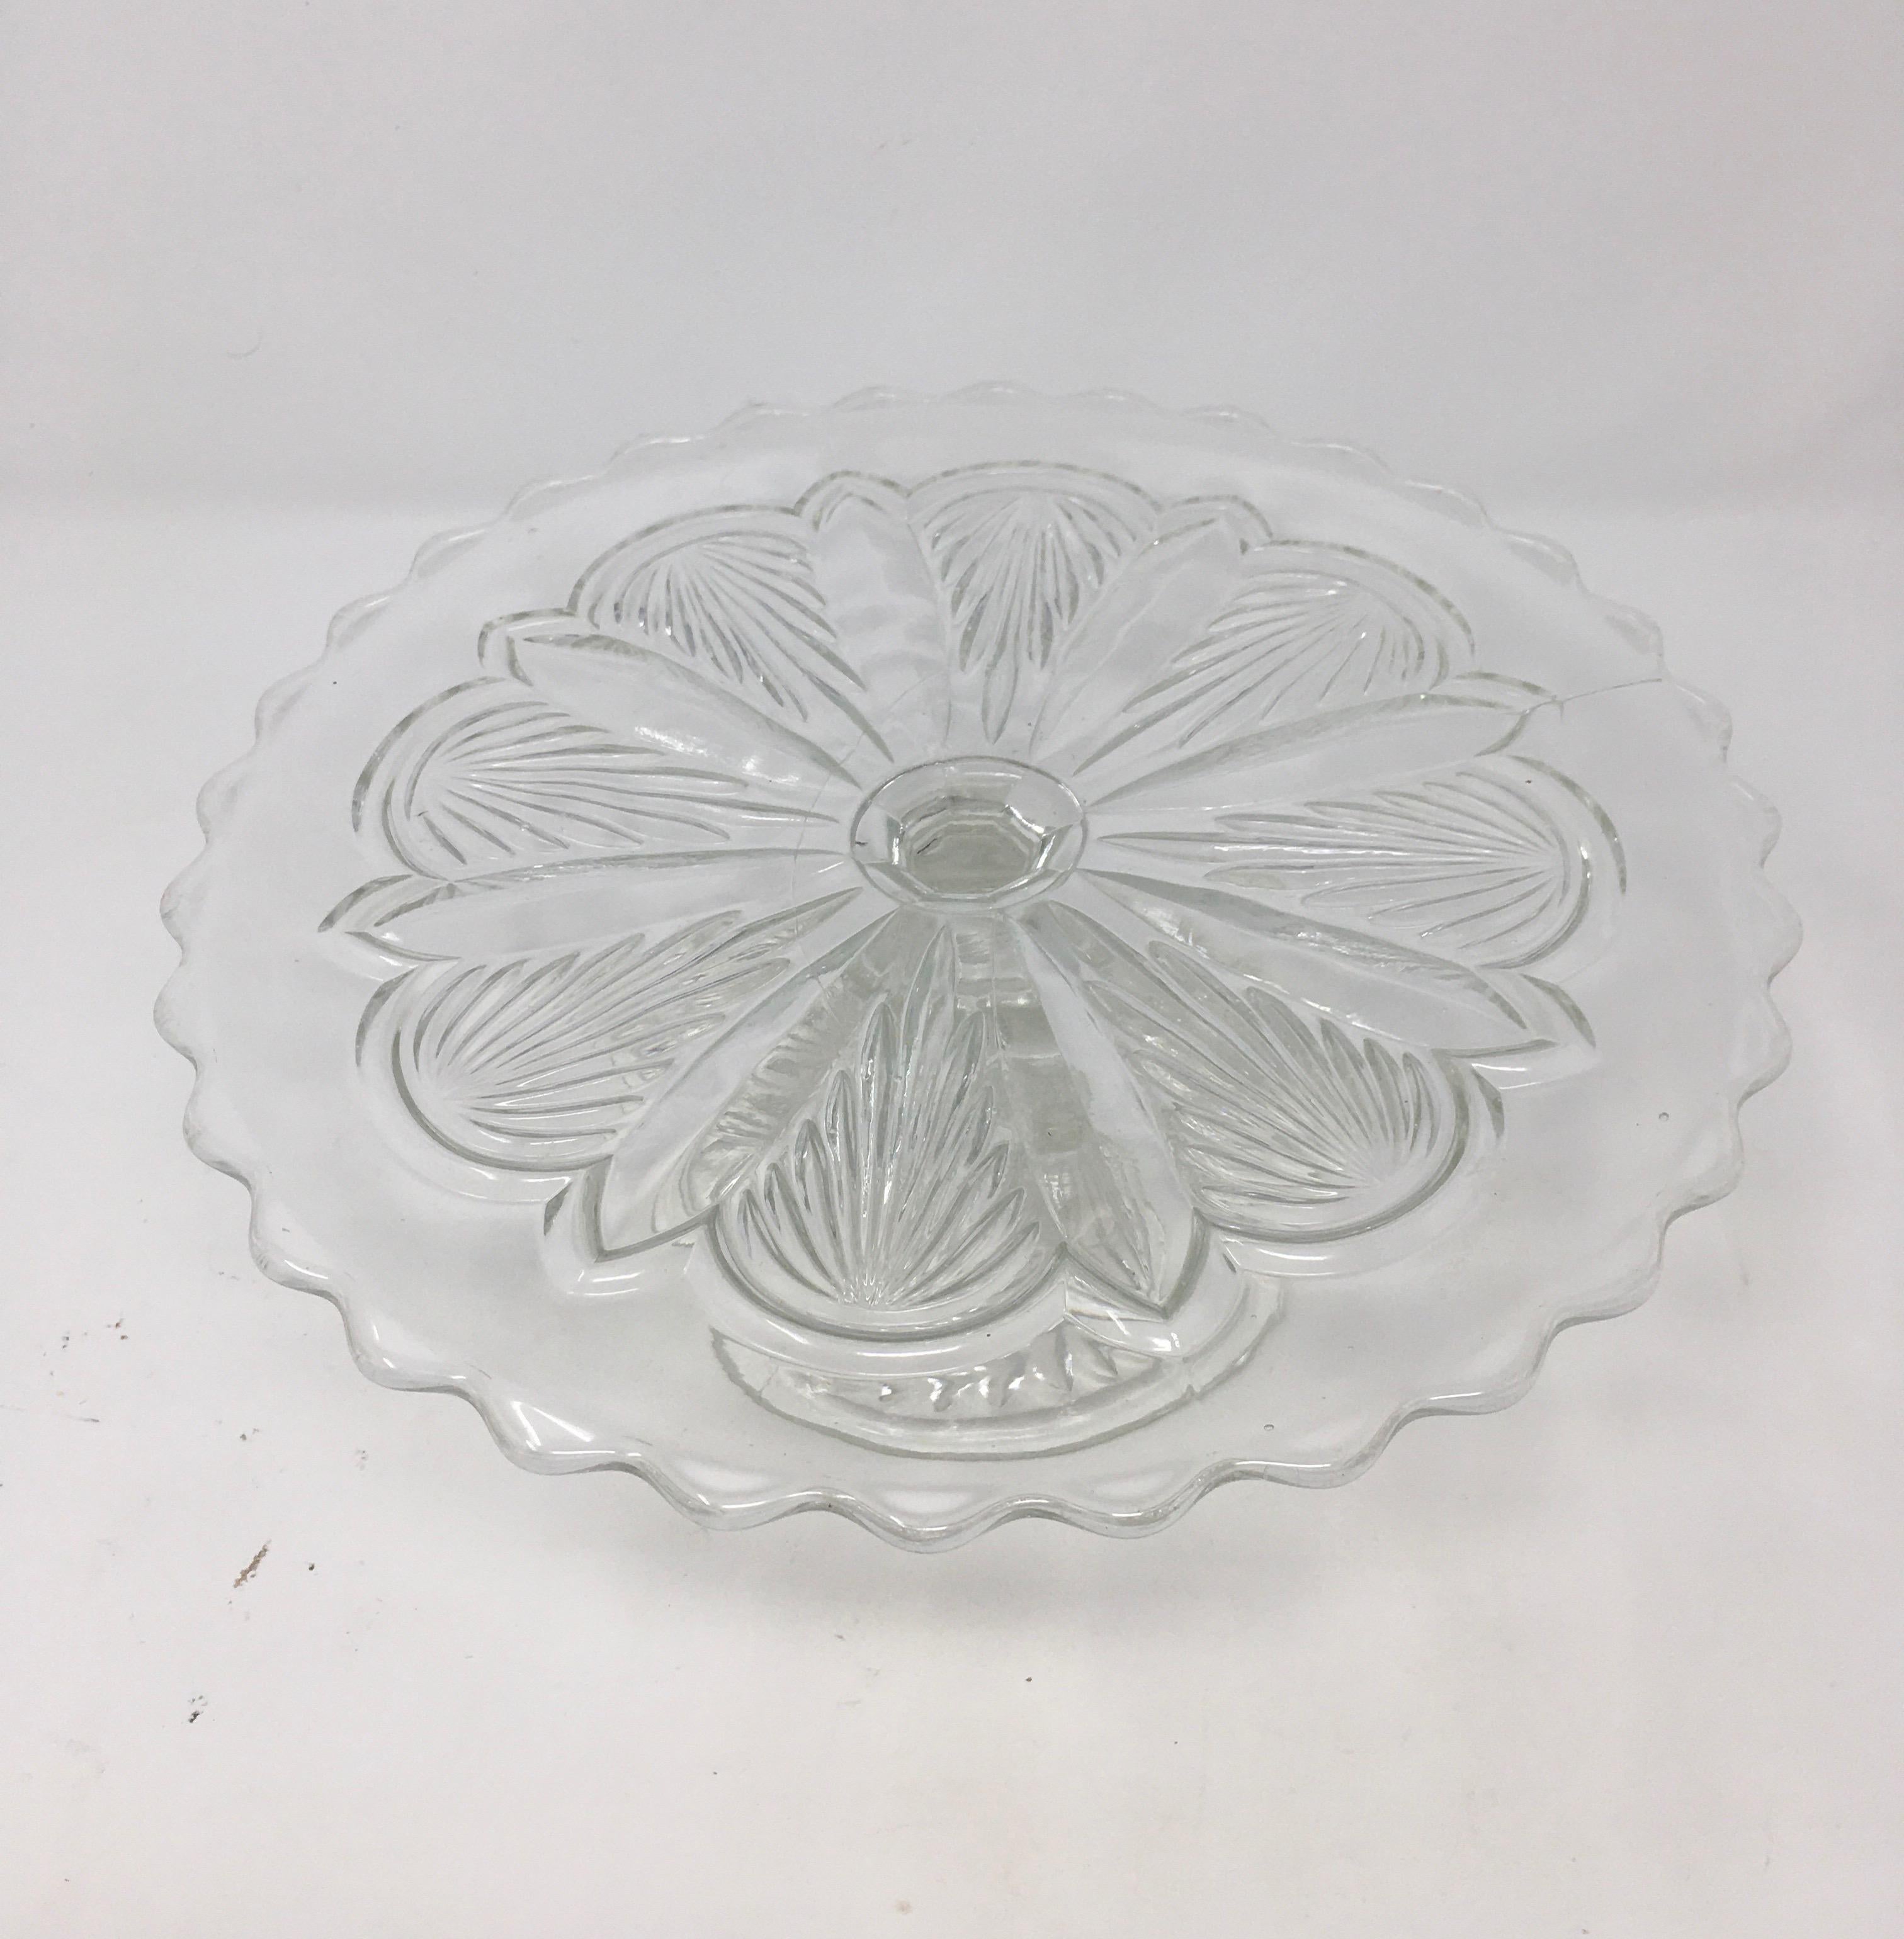 This antique cut glass cake patisserie stand sits on a cut glass pedestal base. Perfect for displaying your culinary confections, this piece’s simple, elegant look will mix with any decor.